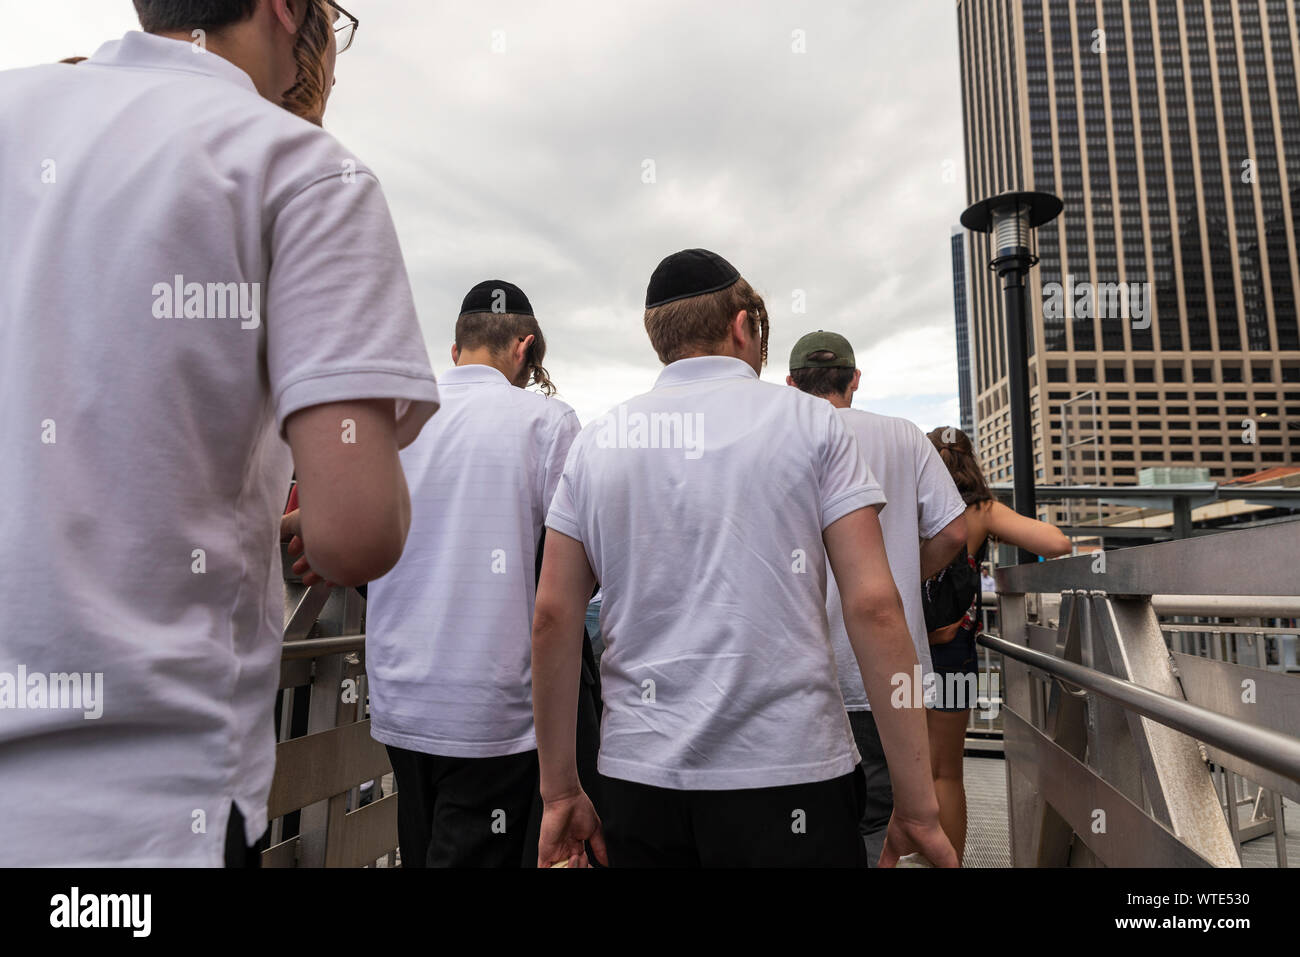 New York City, USA - August 2, 2018: Ultra-orthodox young Jews with kippah walking on a jetty in Manhattan, New York City, USA Stock Photo